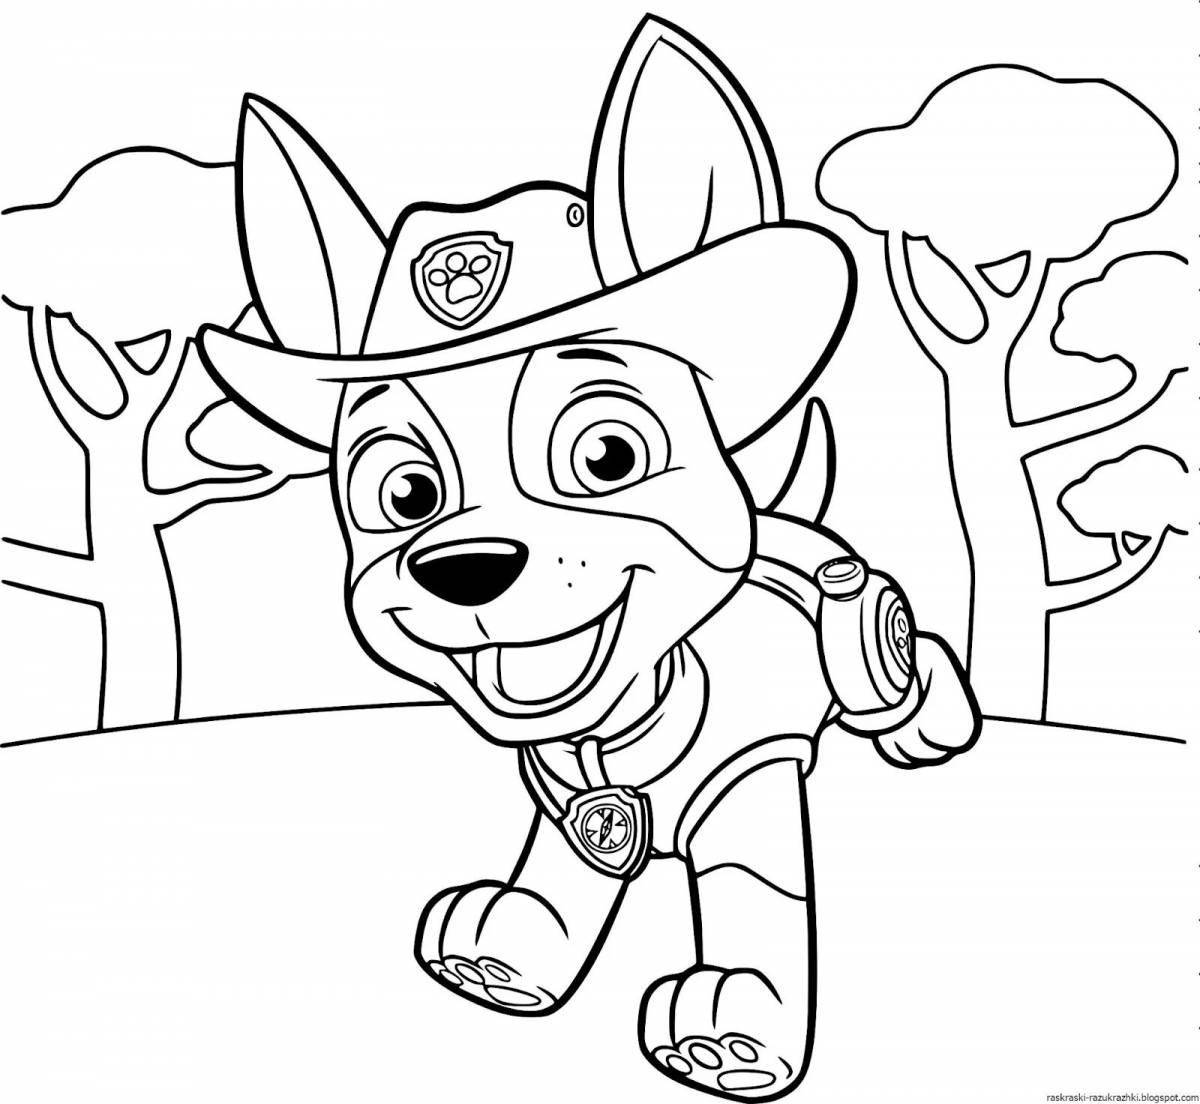 Amazing coloring page paw patrol photo